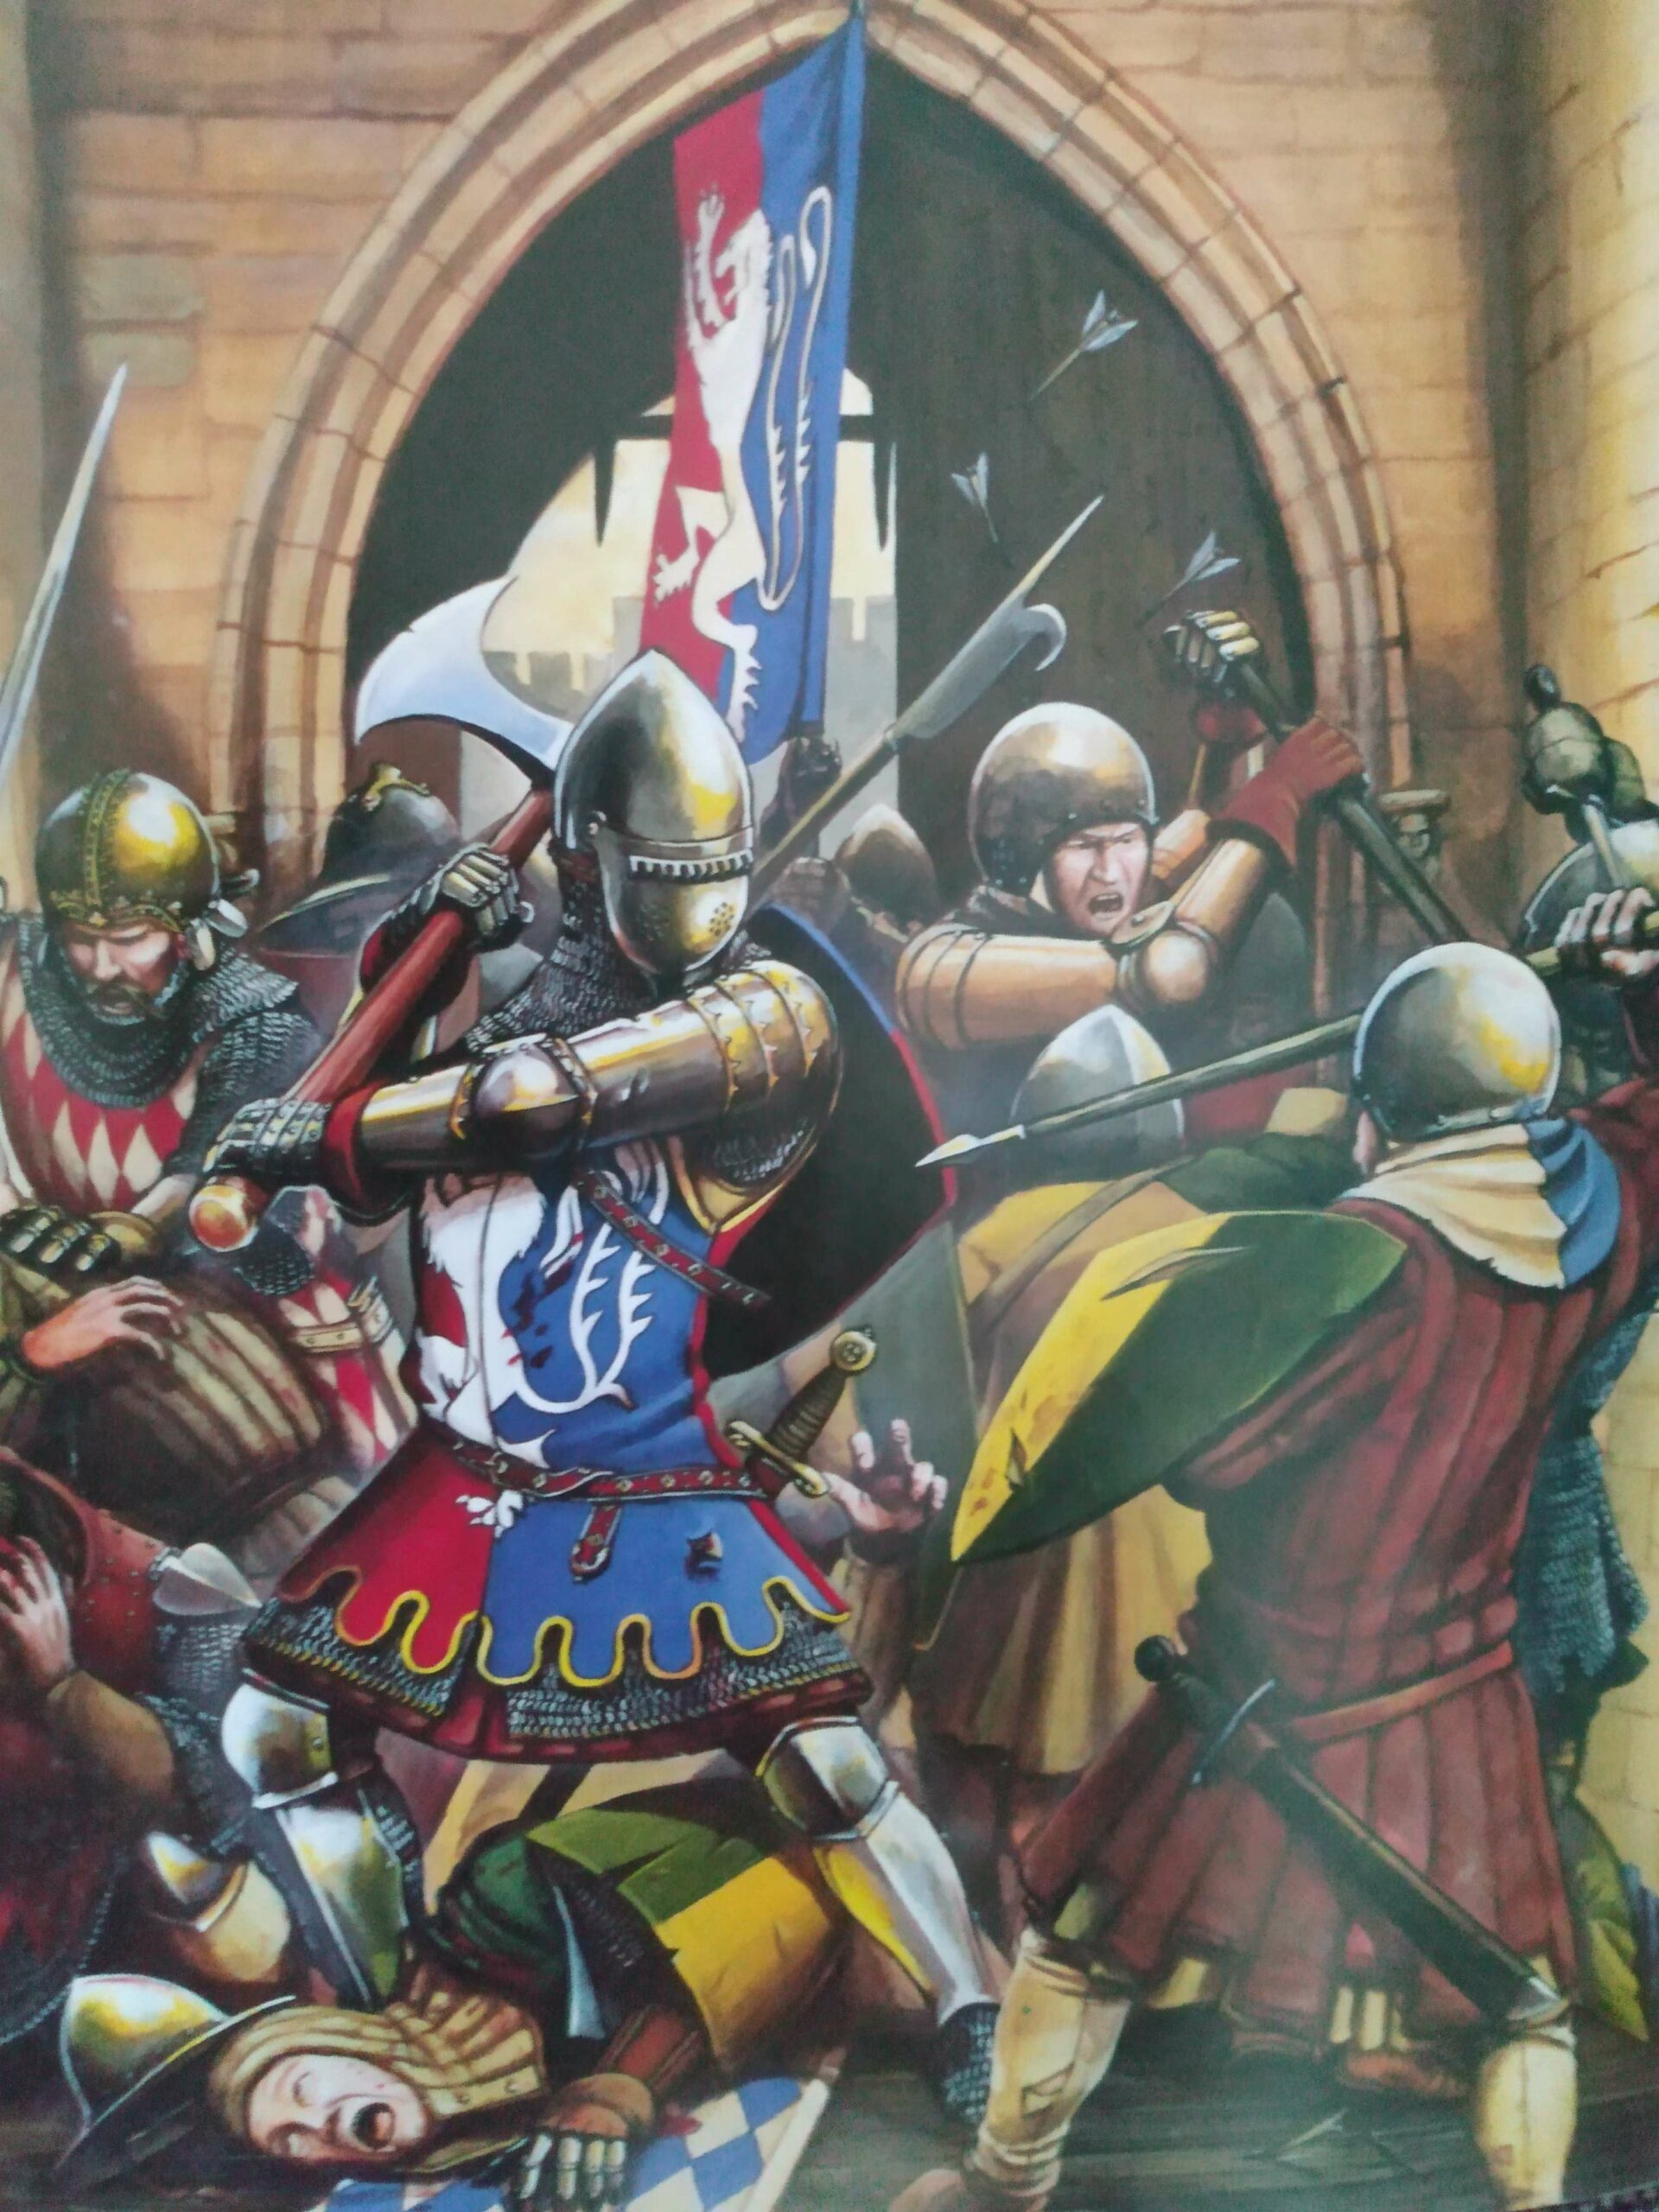 A medieval battle scene painted by Michael Perry. Knights fight fiercely to hold the drawbridge against an enemy assault.